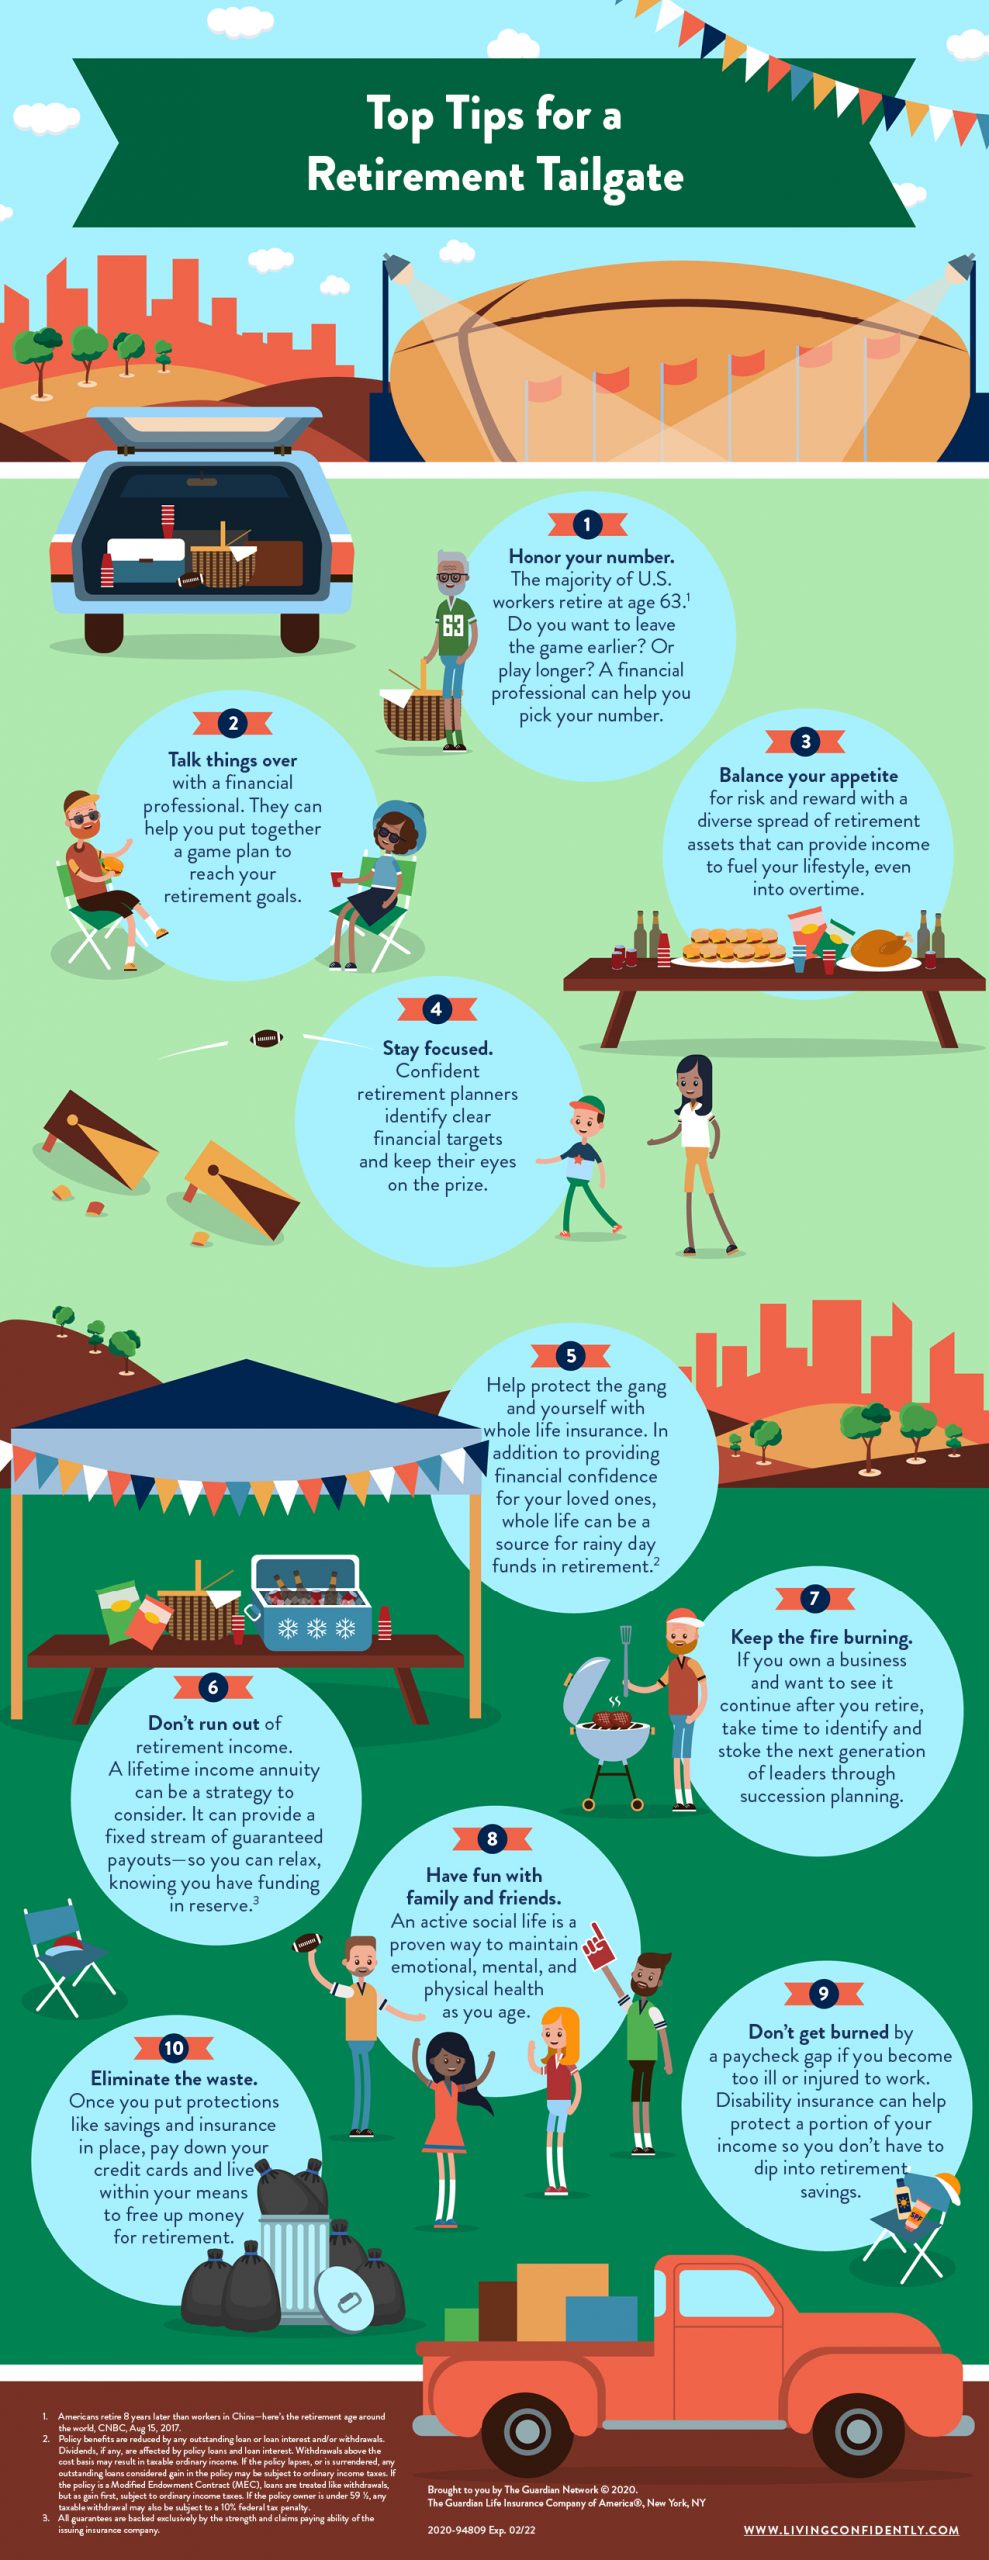 Infographic featuring tips for sports tailgating in retirement